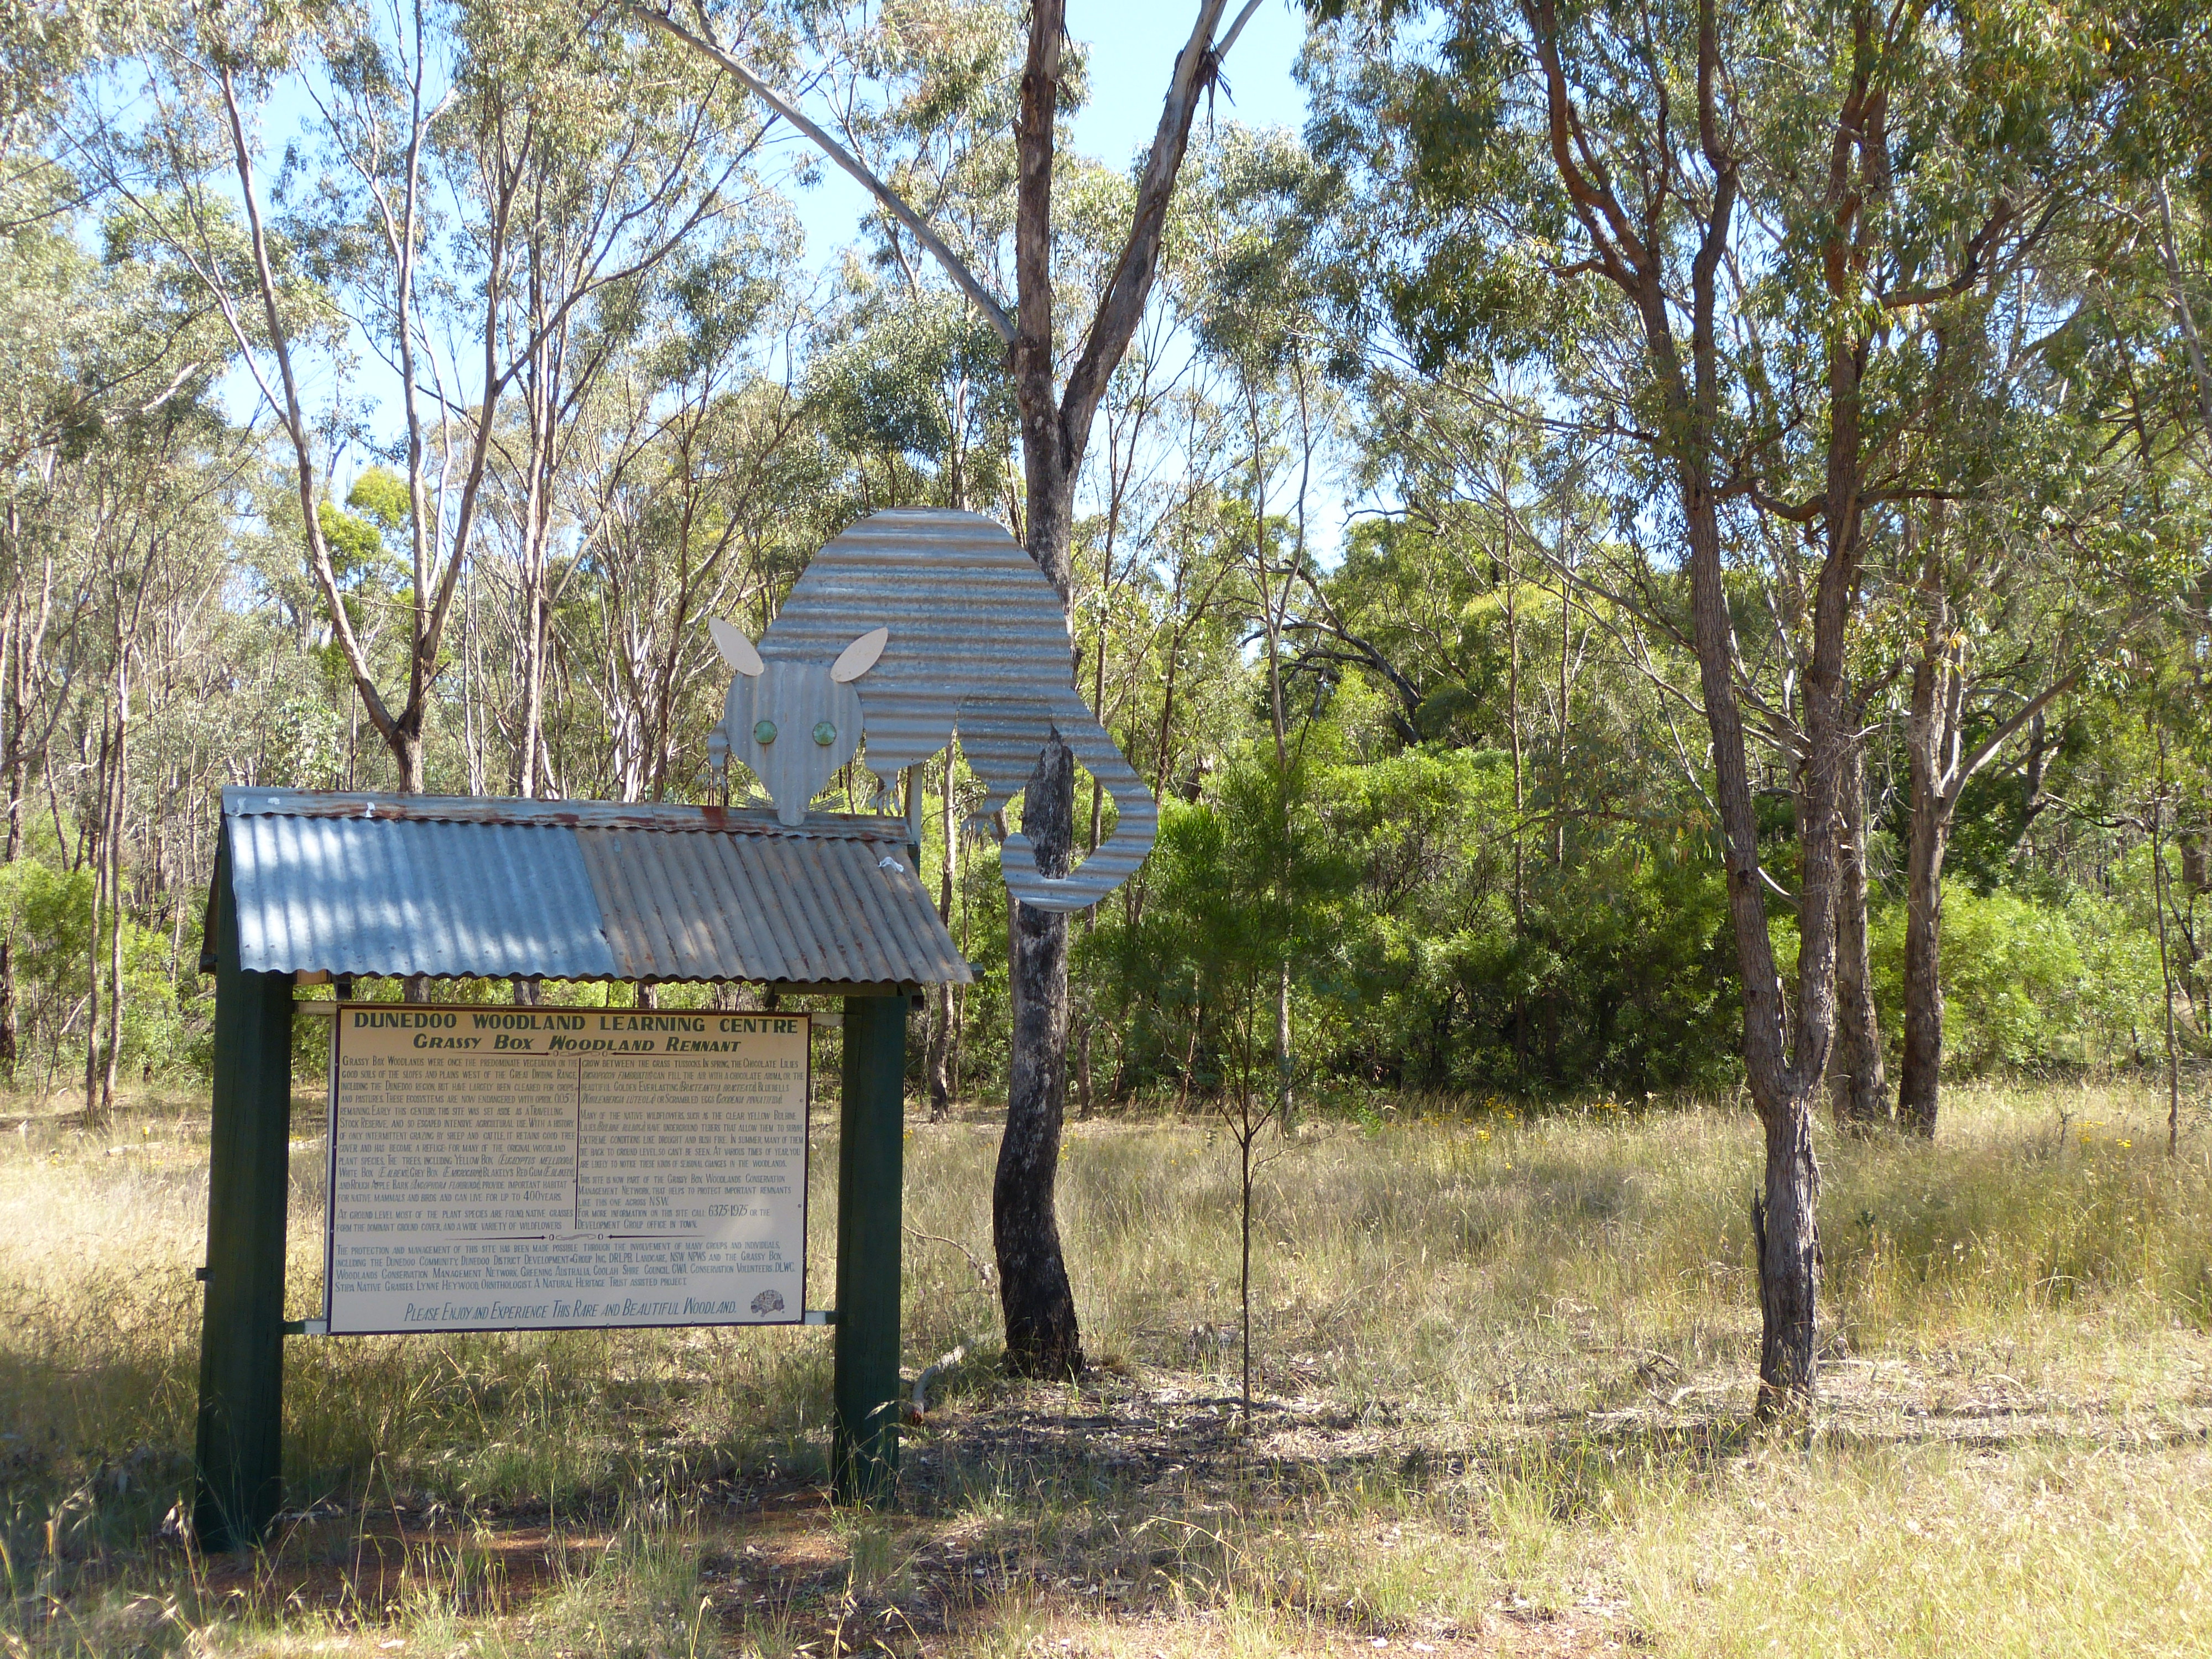 A sign with a large metal possum on top of it, stands in front of gum trees in a grassy clearing. The words on the sign cannot be read.